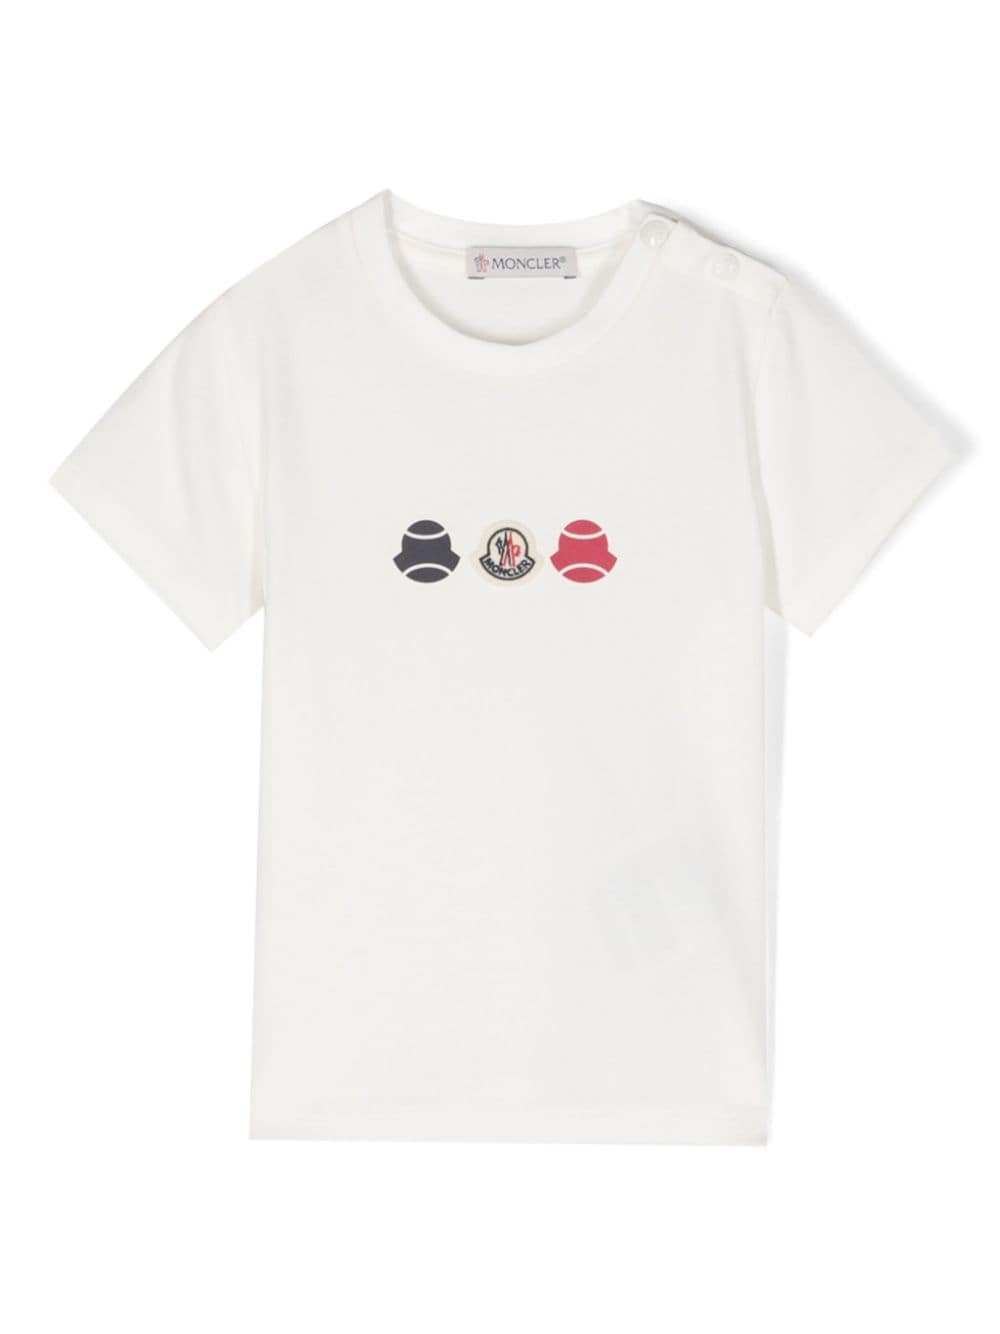 T-shirt stampata con patch logo<br><br><br>